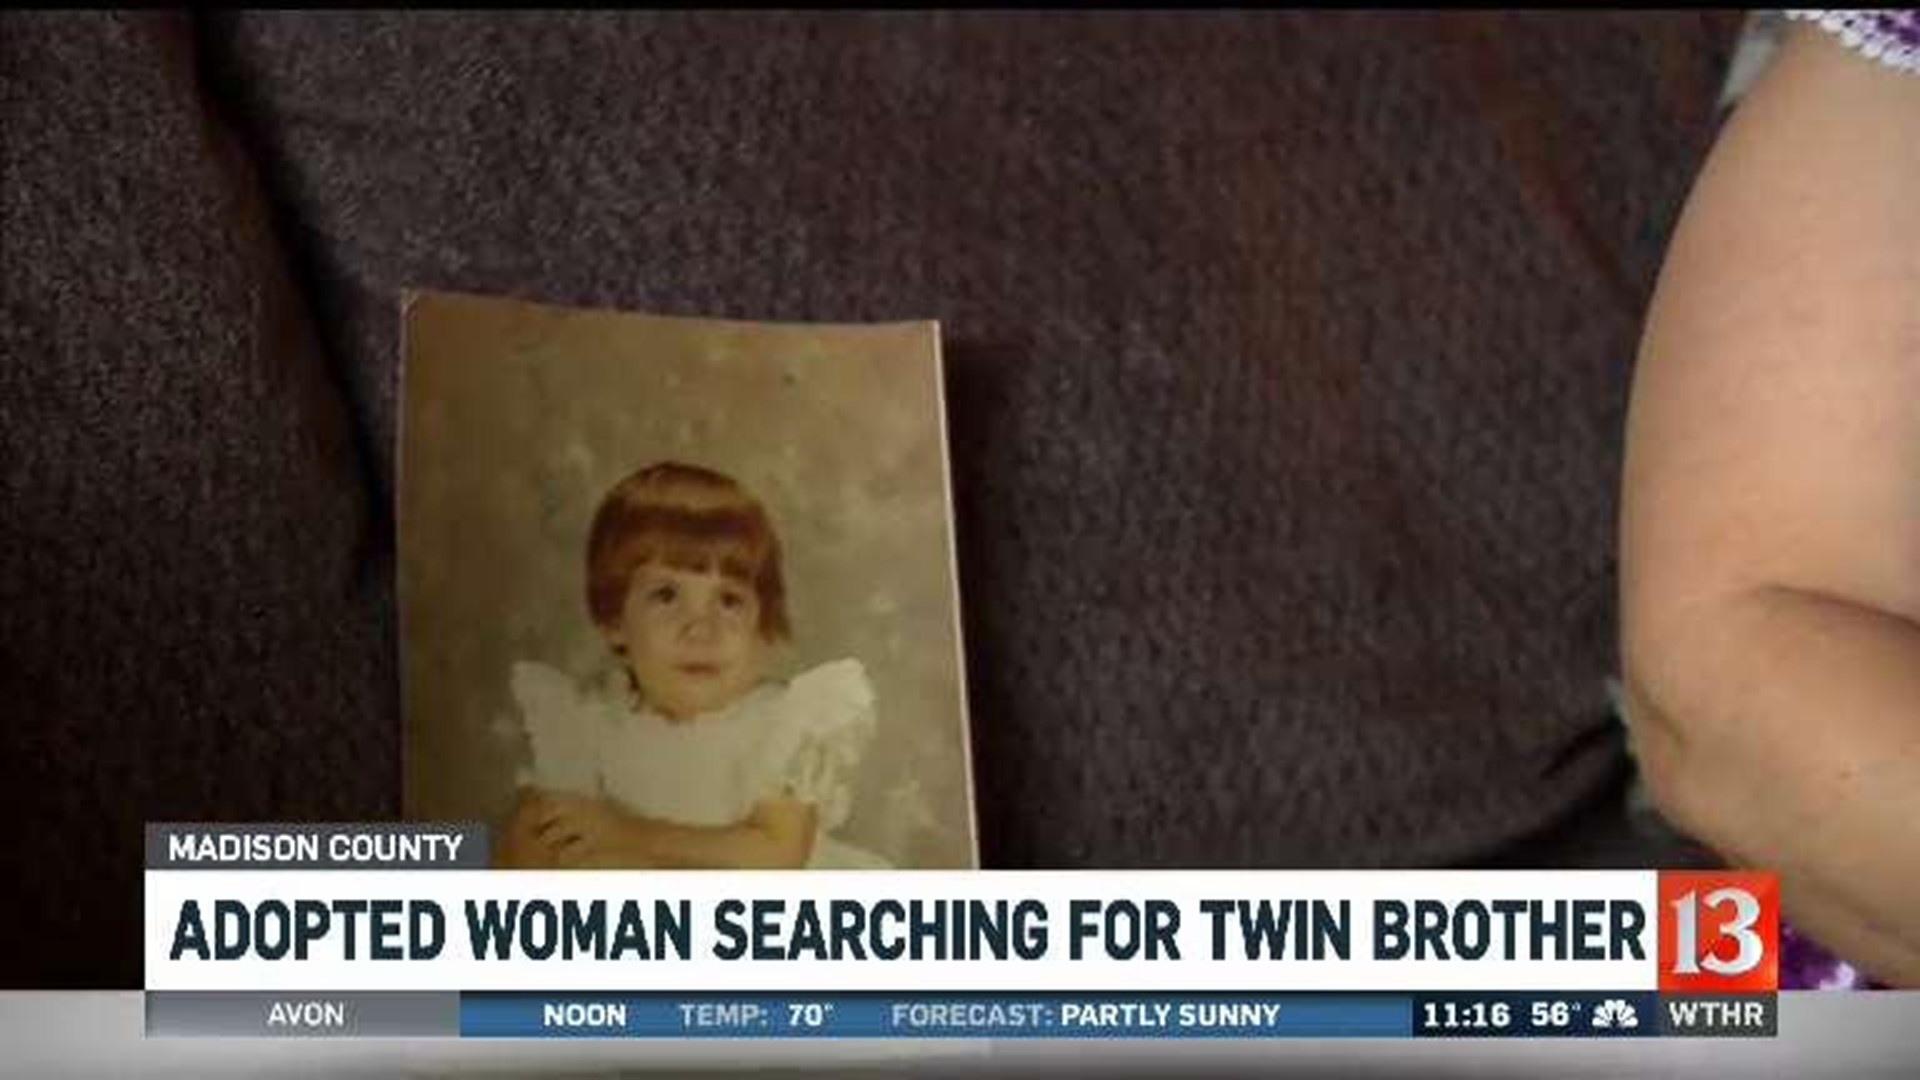 Adopted Woman Searching for Twin Brother